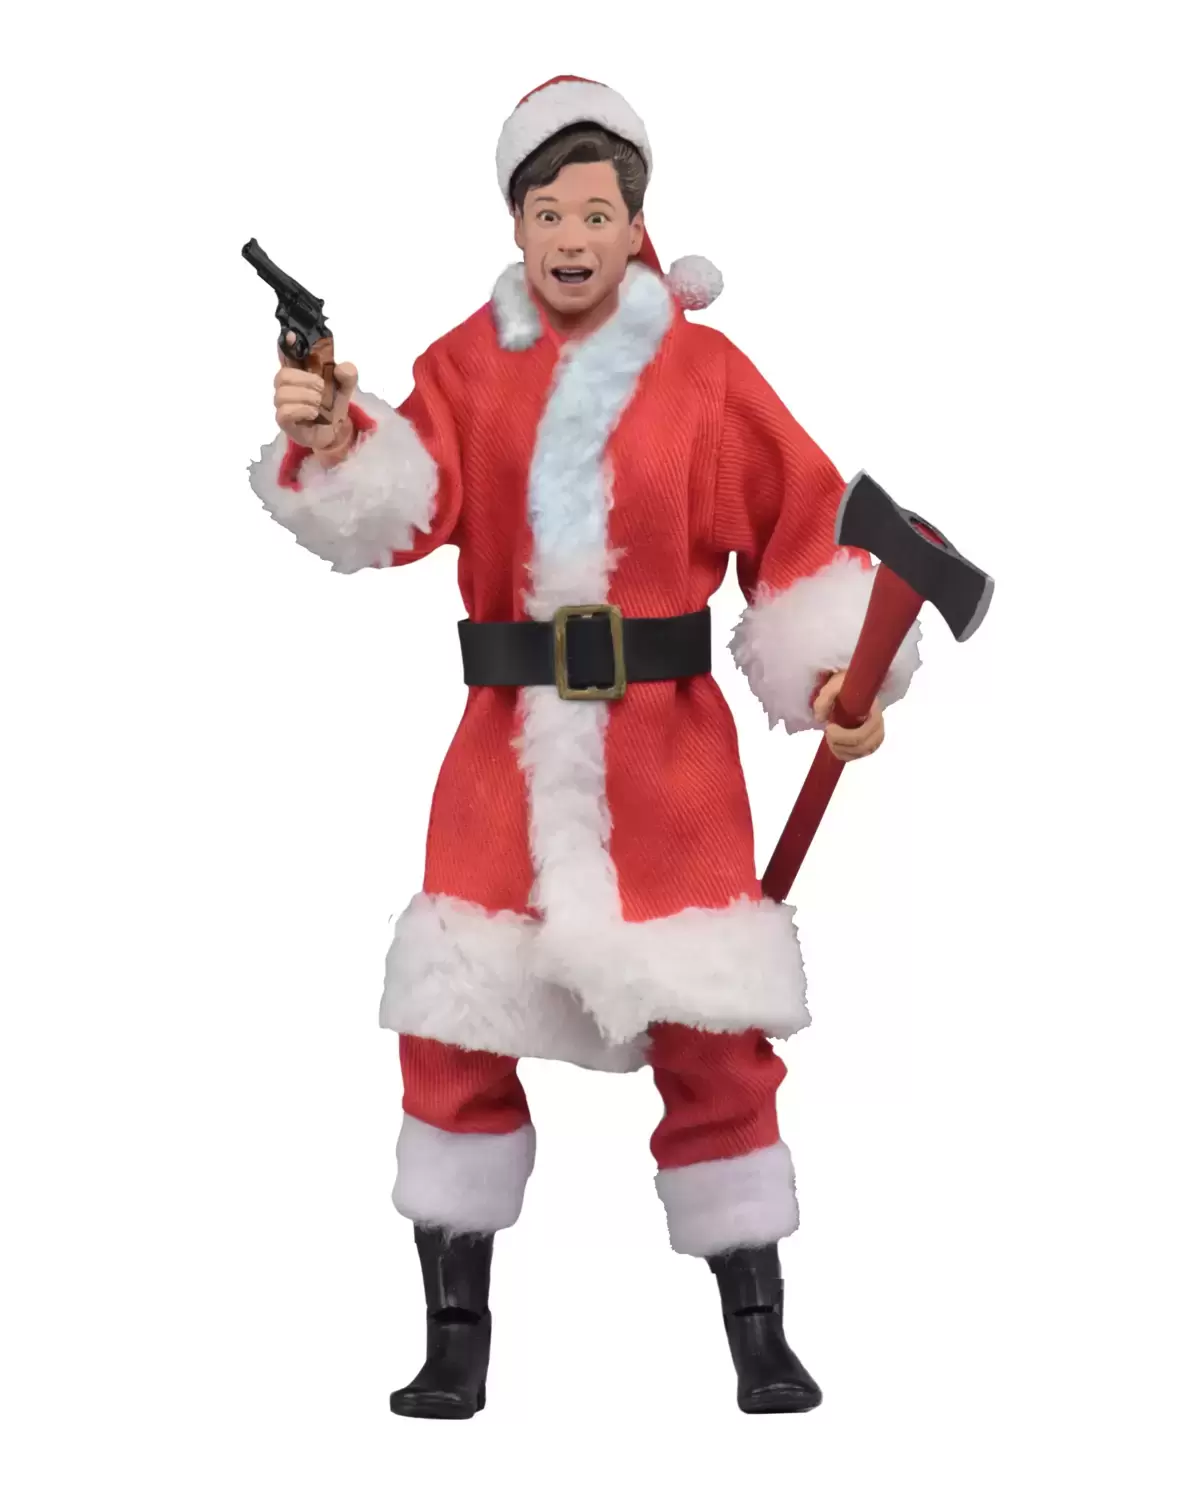 NECA - Silent Night, Deadly Night Part 2 - Ricky Chapman Clothed